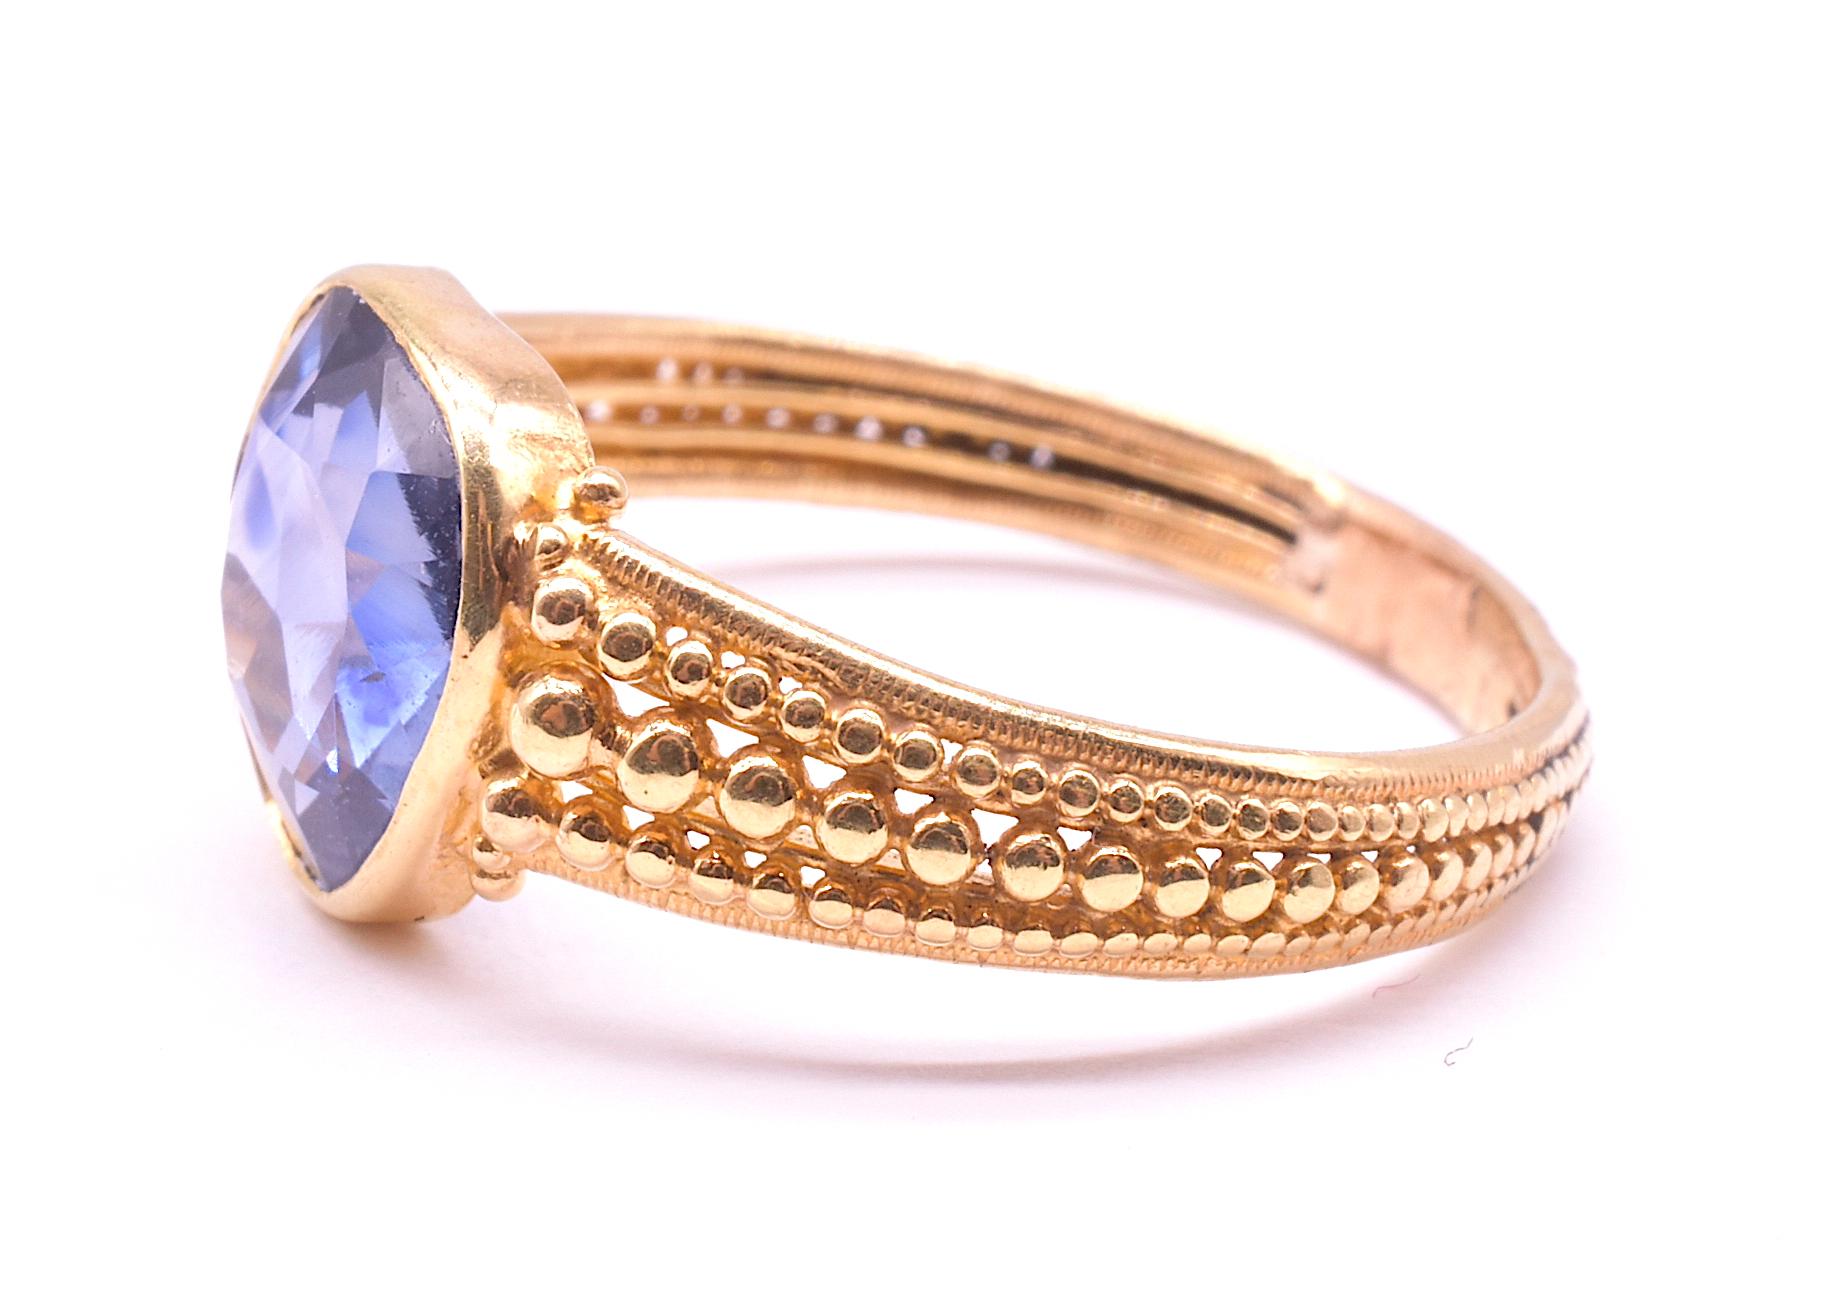 Our 18K open backed sapphire ring has unusual hand crafted gold bead work  in concentric rows all along the band evoking similarity to cannetille work. The sapphire is a lovely translucent cornflower blue. The gold beads are set in graduated sizes,